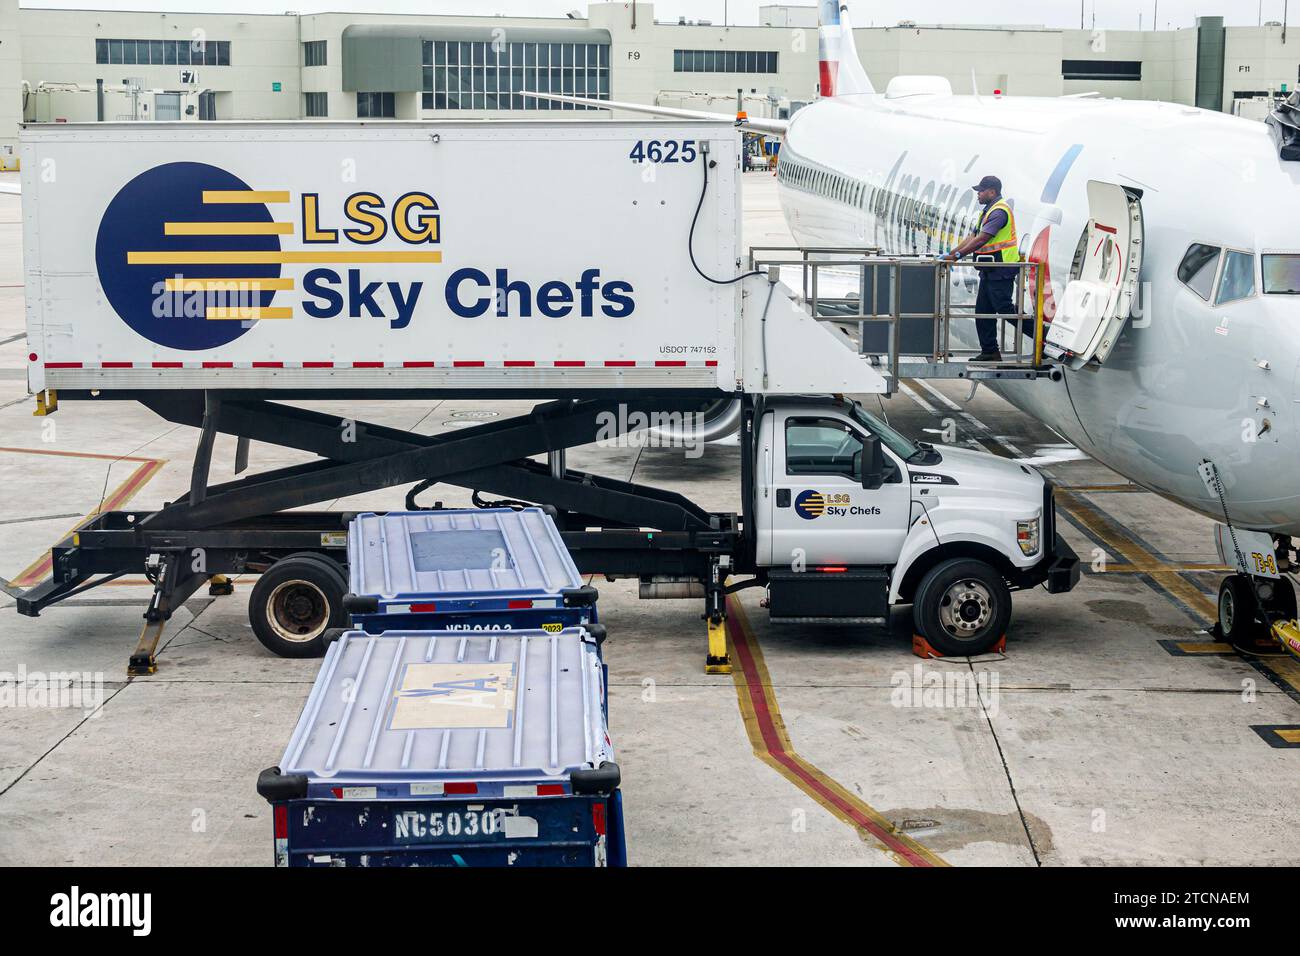 Miami Florida,Miami International Airport MIA,terminal concourse,gate area,tarmac American Airlines jet airliner plane airplane,LSG Sky Chefs catering Stock Photo